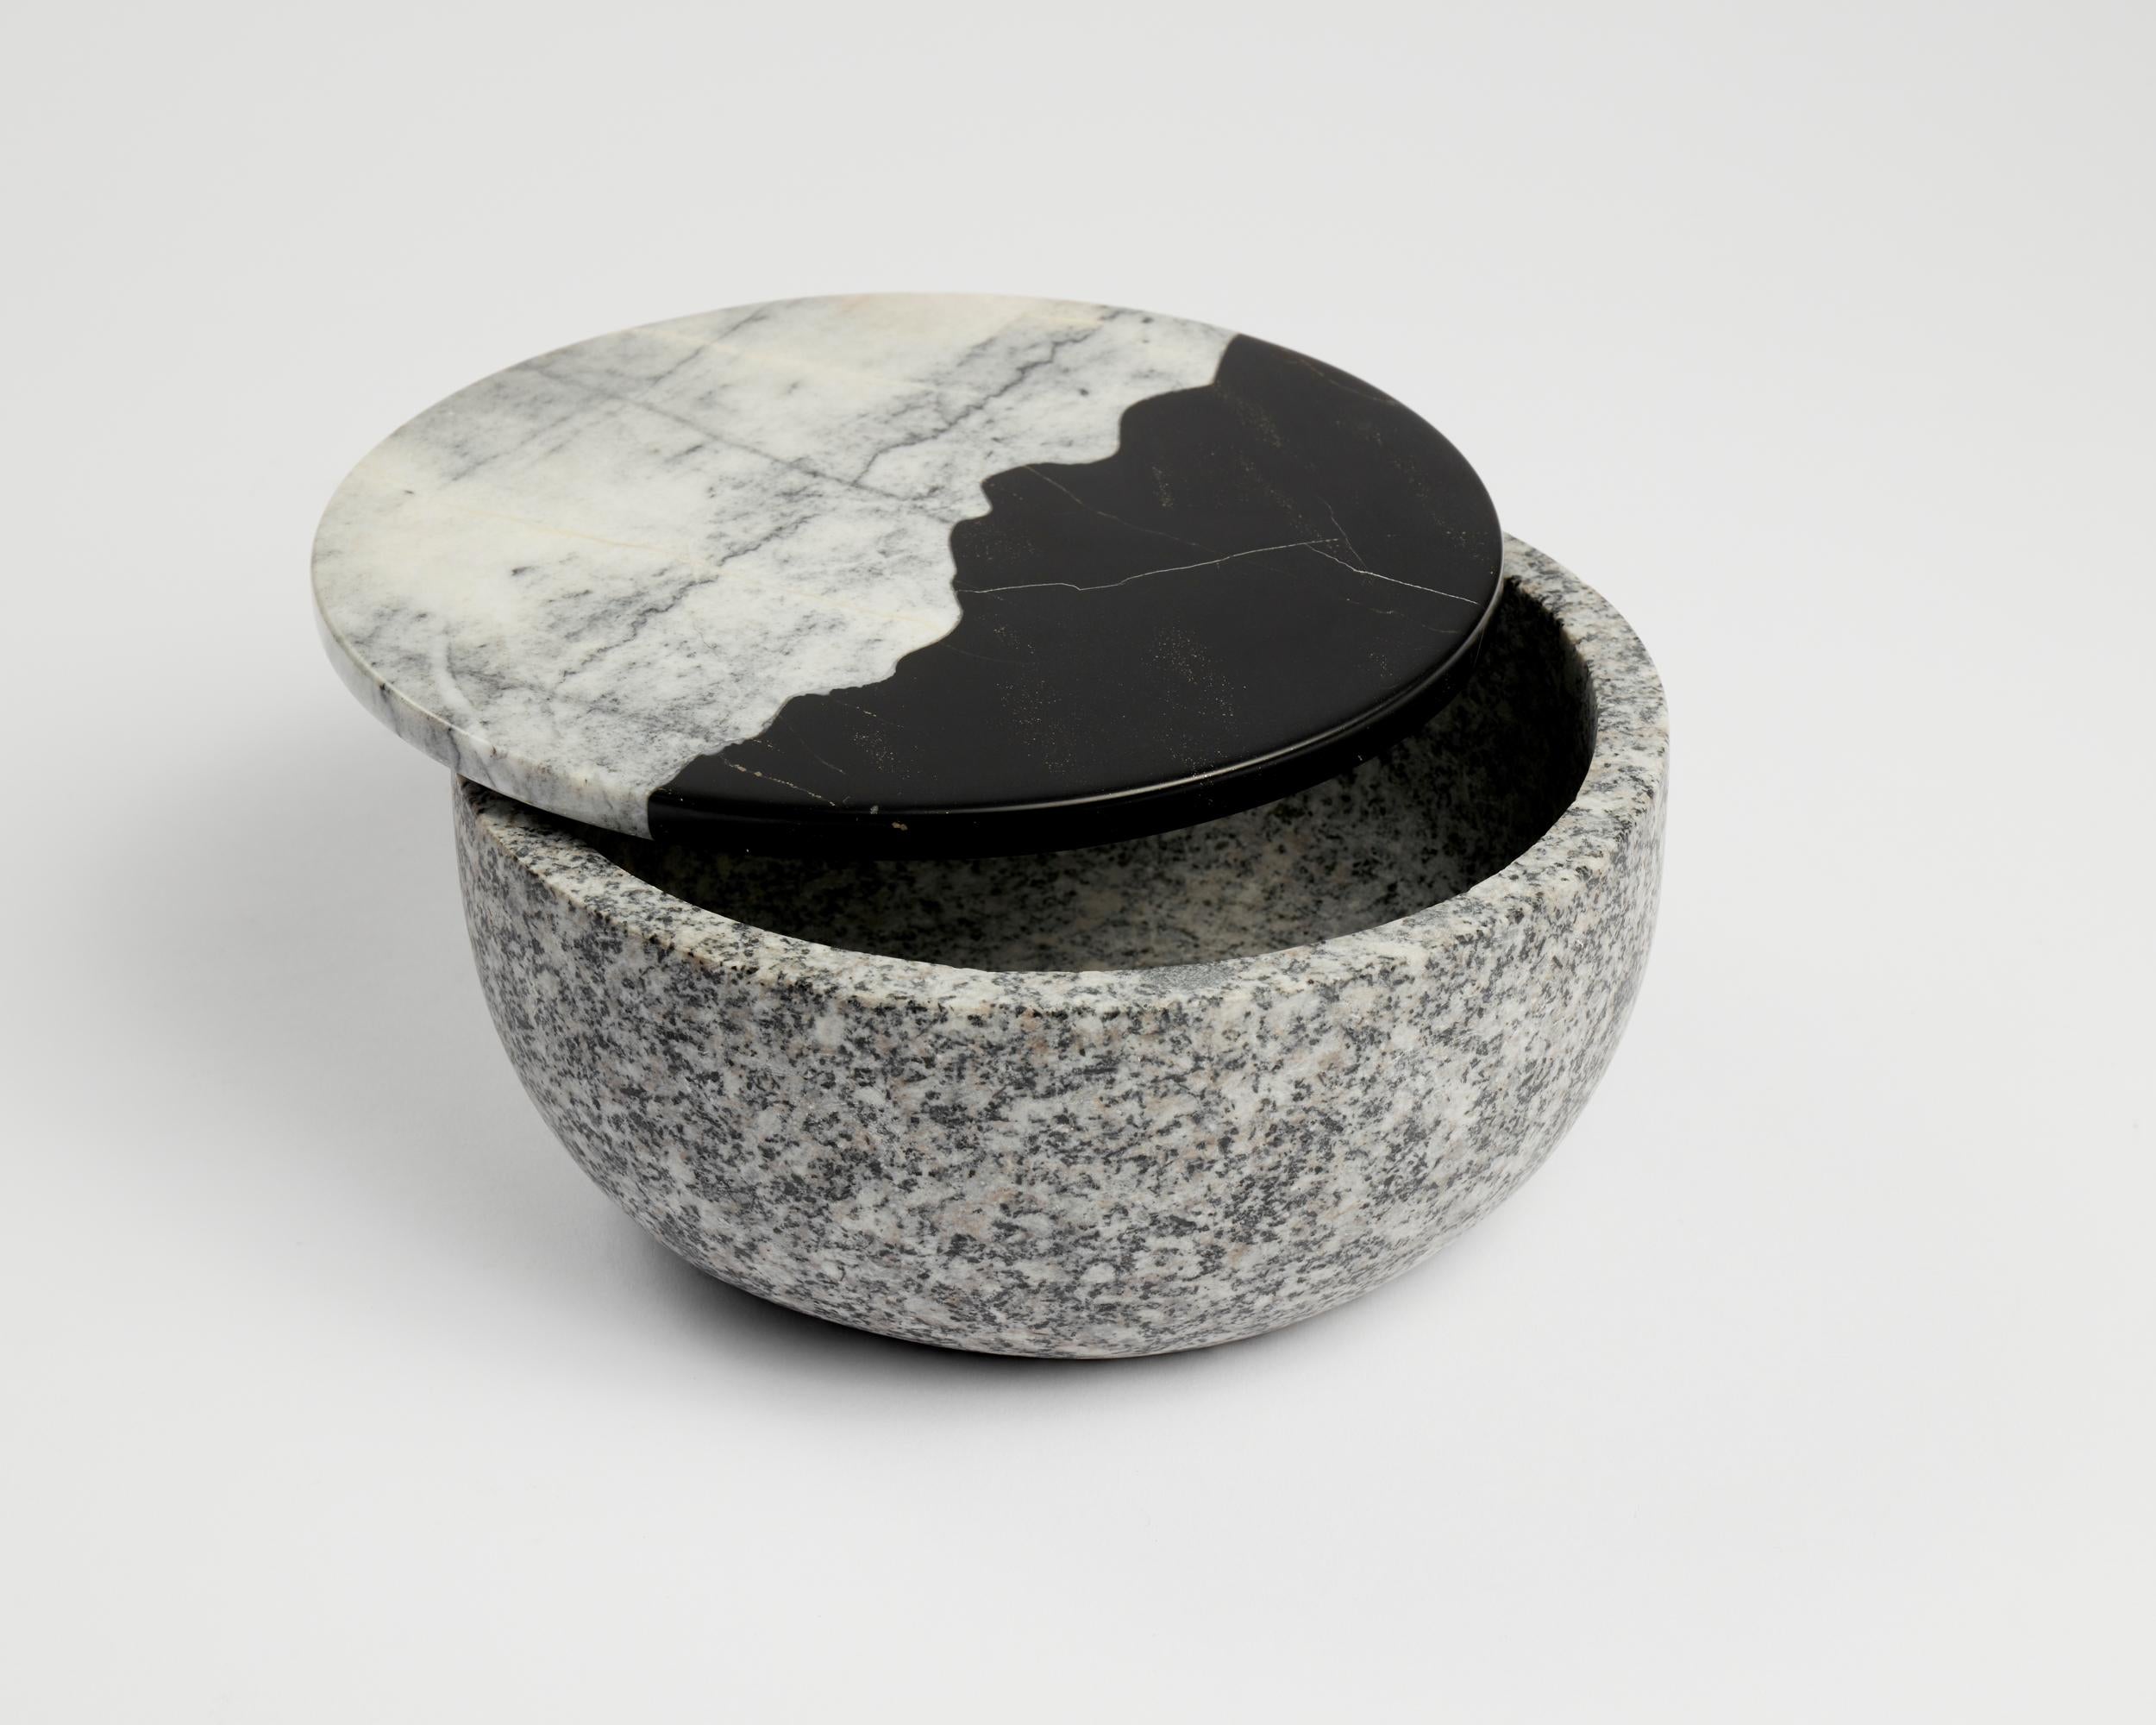 Sprouter pot by Estudio Rafael Freyre
Dimensions: D 15 x H 8 cm 
Materials: Andes Stone, Amazonic Wood.
Also Available: Other materials and finishes available.

The Sprouters series explores the interaction of mineral and plant organisms. When